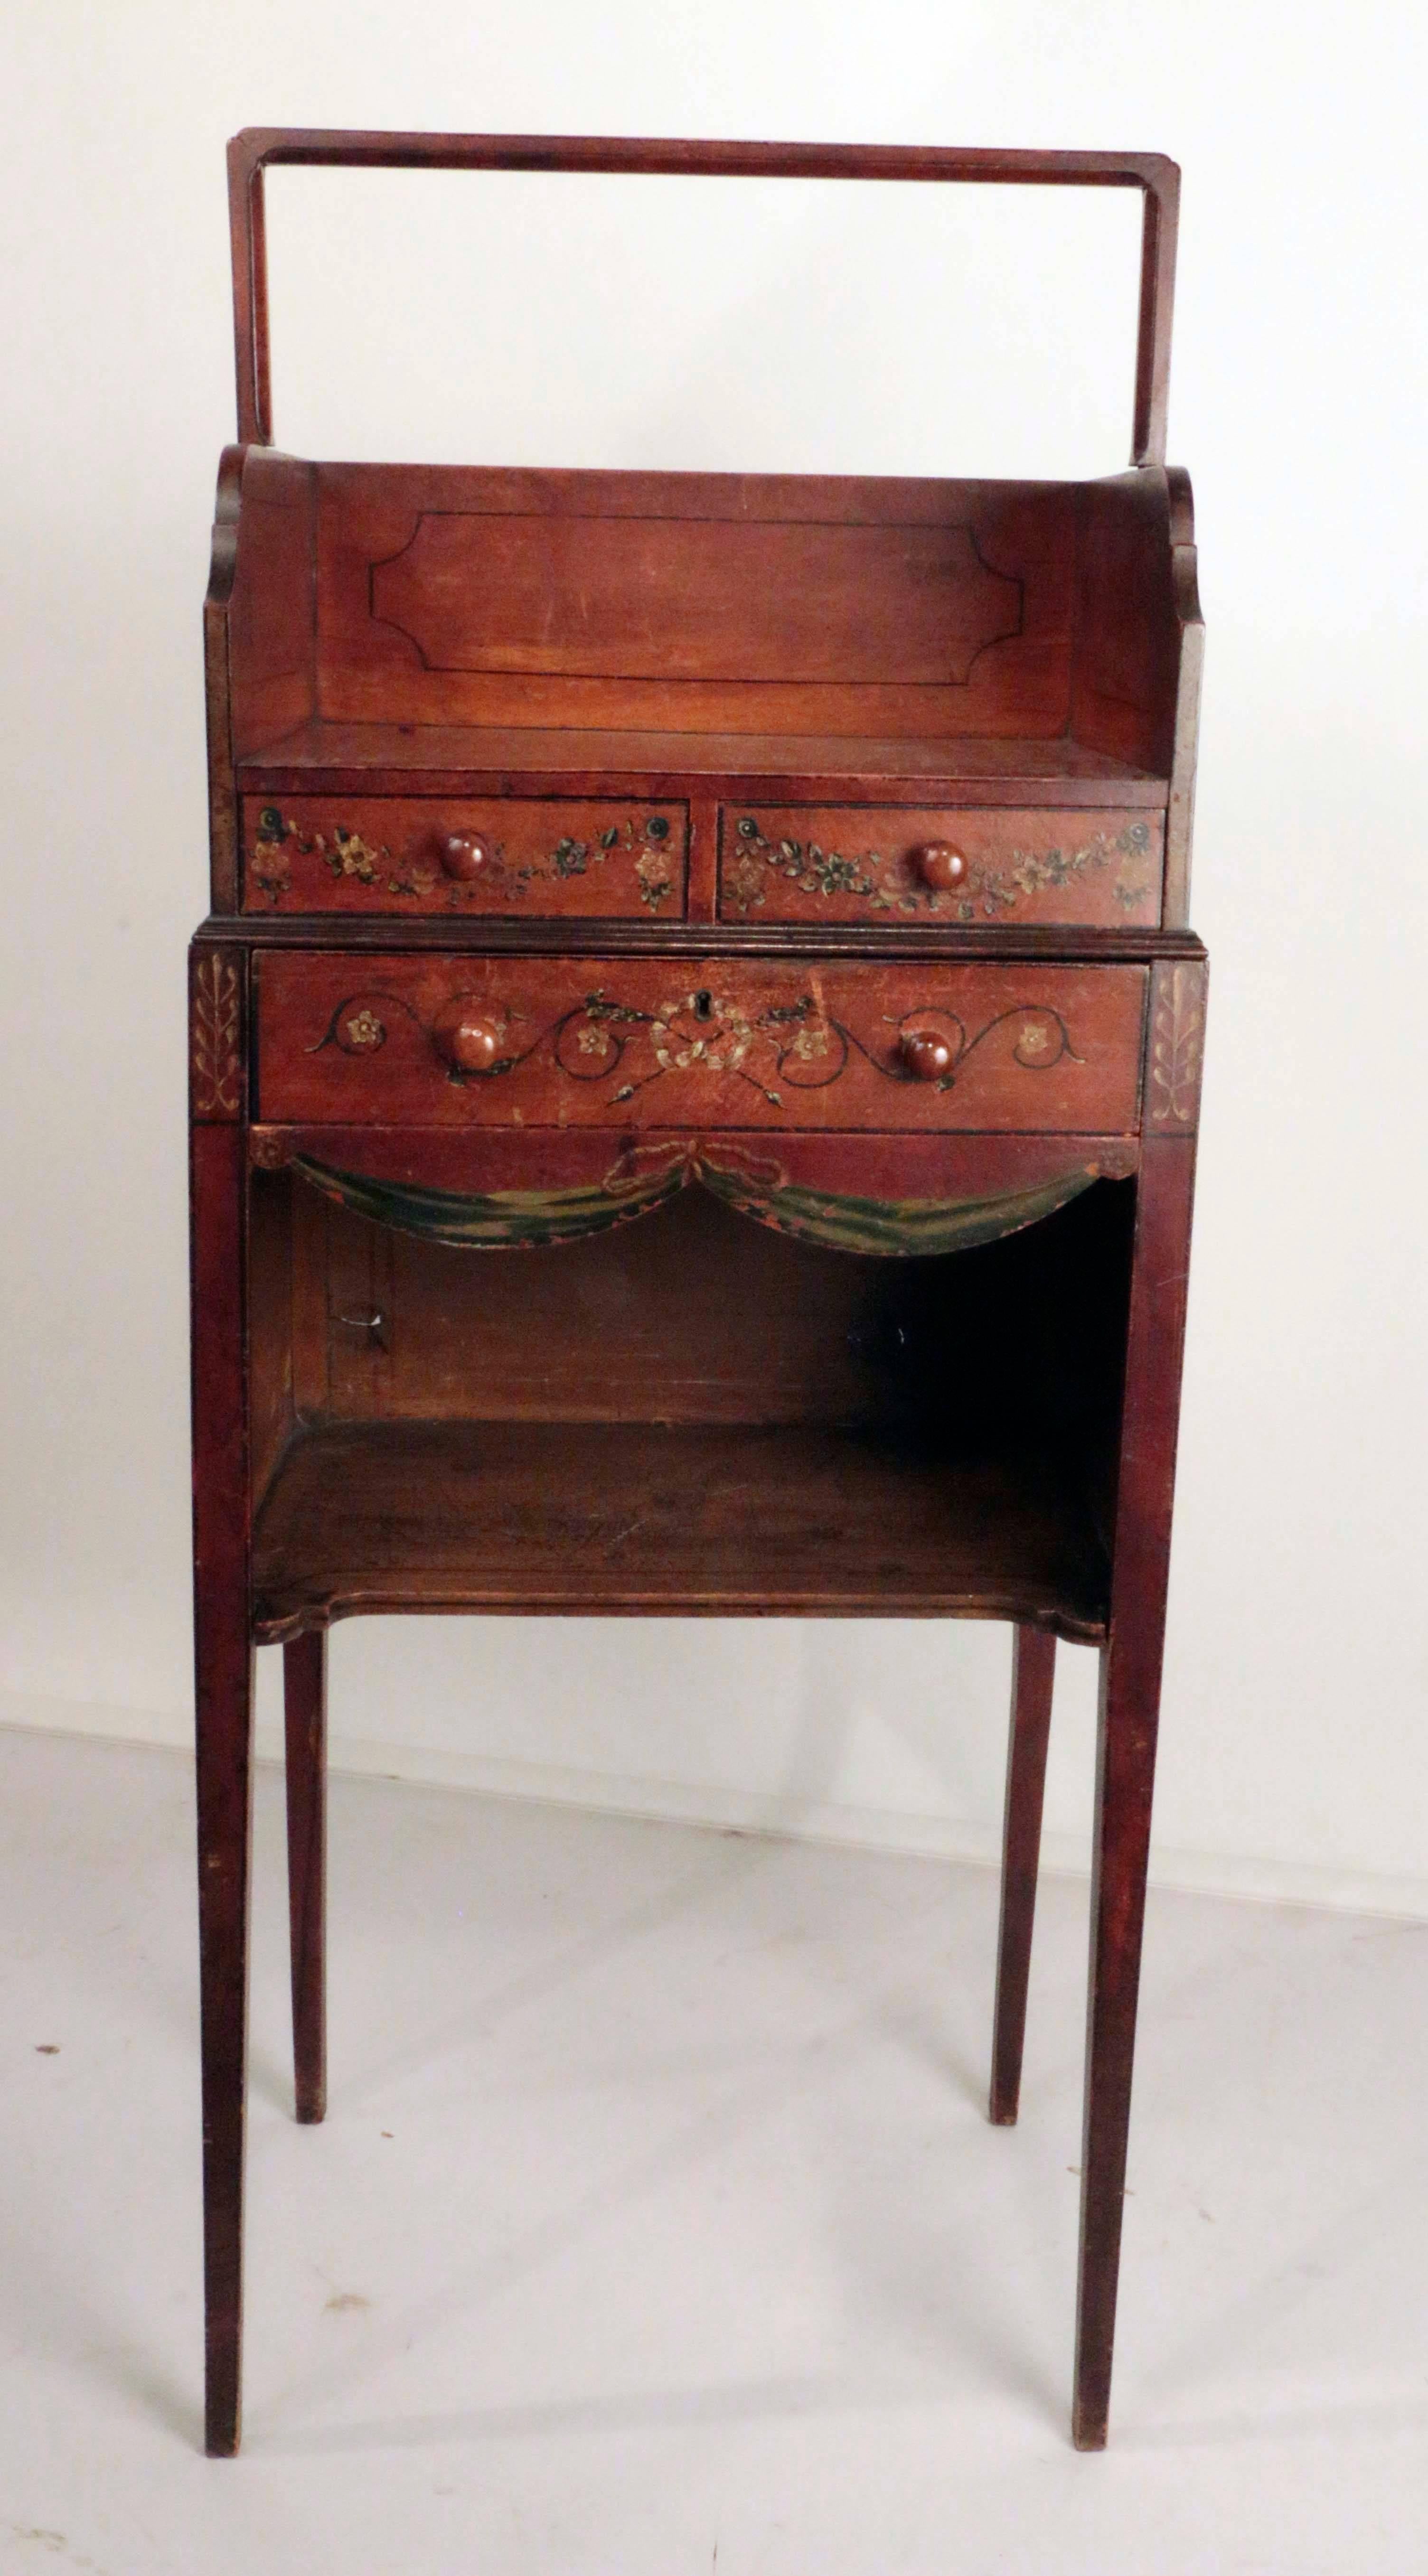 A rare and important Sheraton period painted satinwood cheveret in original finish and with original painted floral swags and garlands. The superstructure with fitted book carrier; the stand with two short drawers above a secretaire drawer, fitted